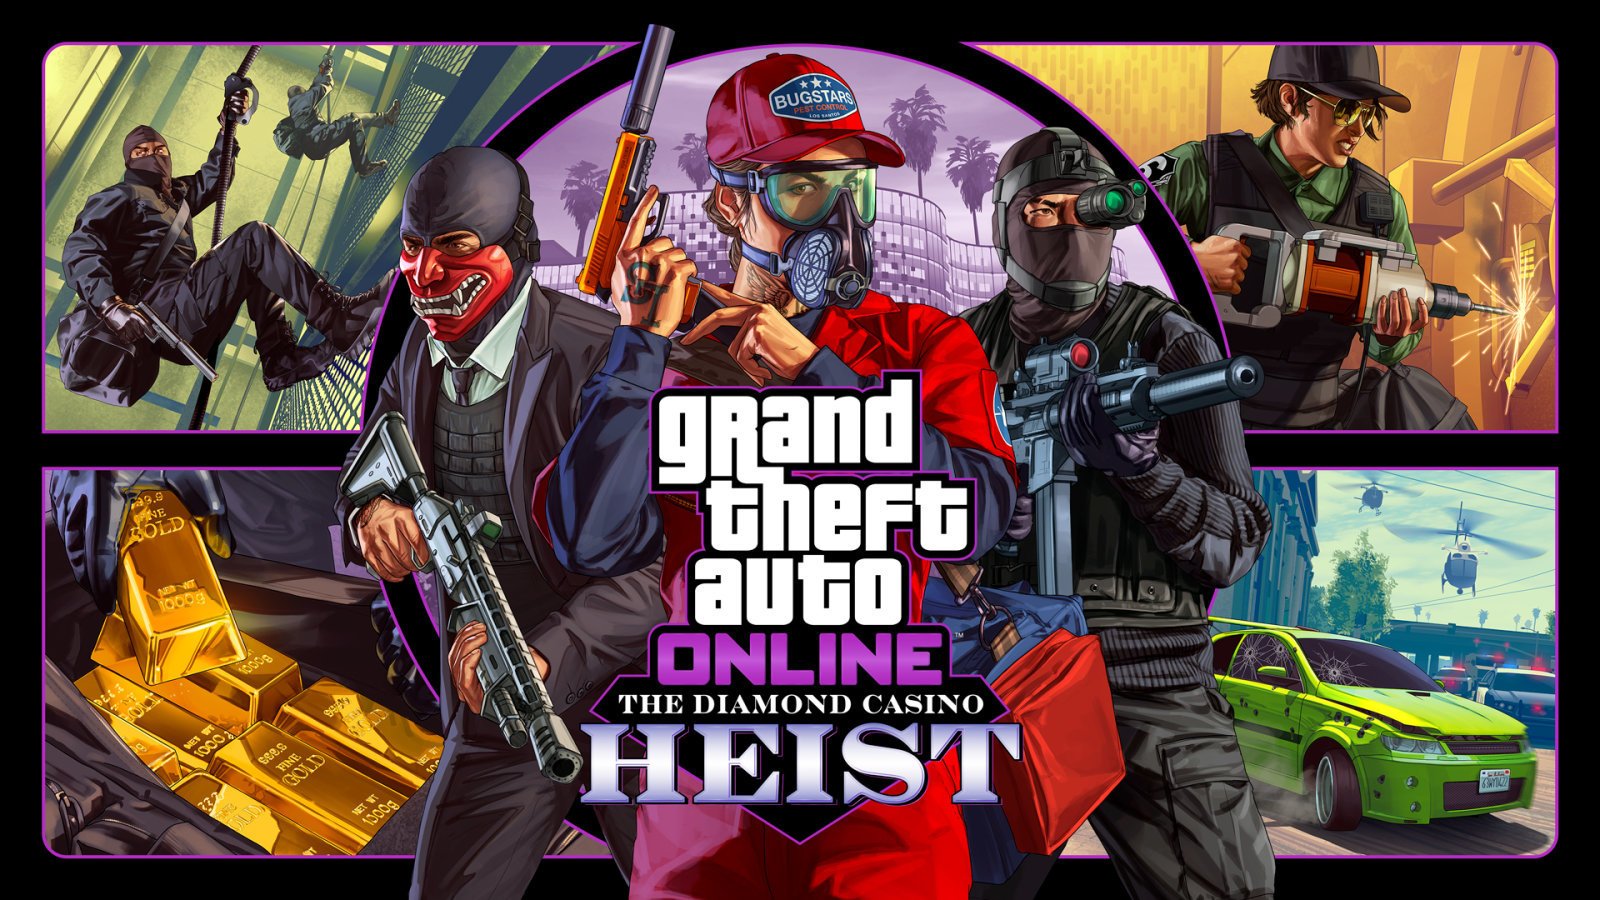 GTA V Update 1.33 File Size, Patch Notes and New Legendary Vehicles